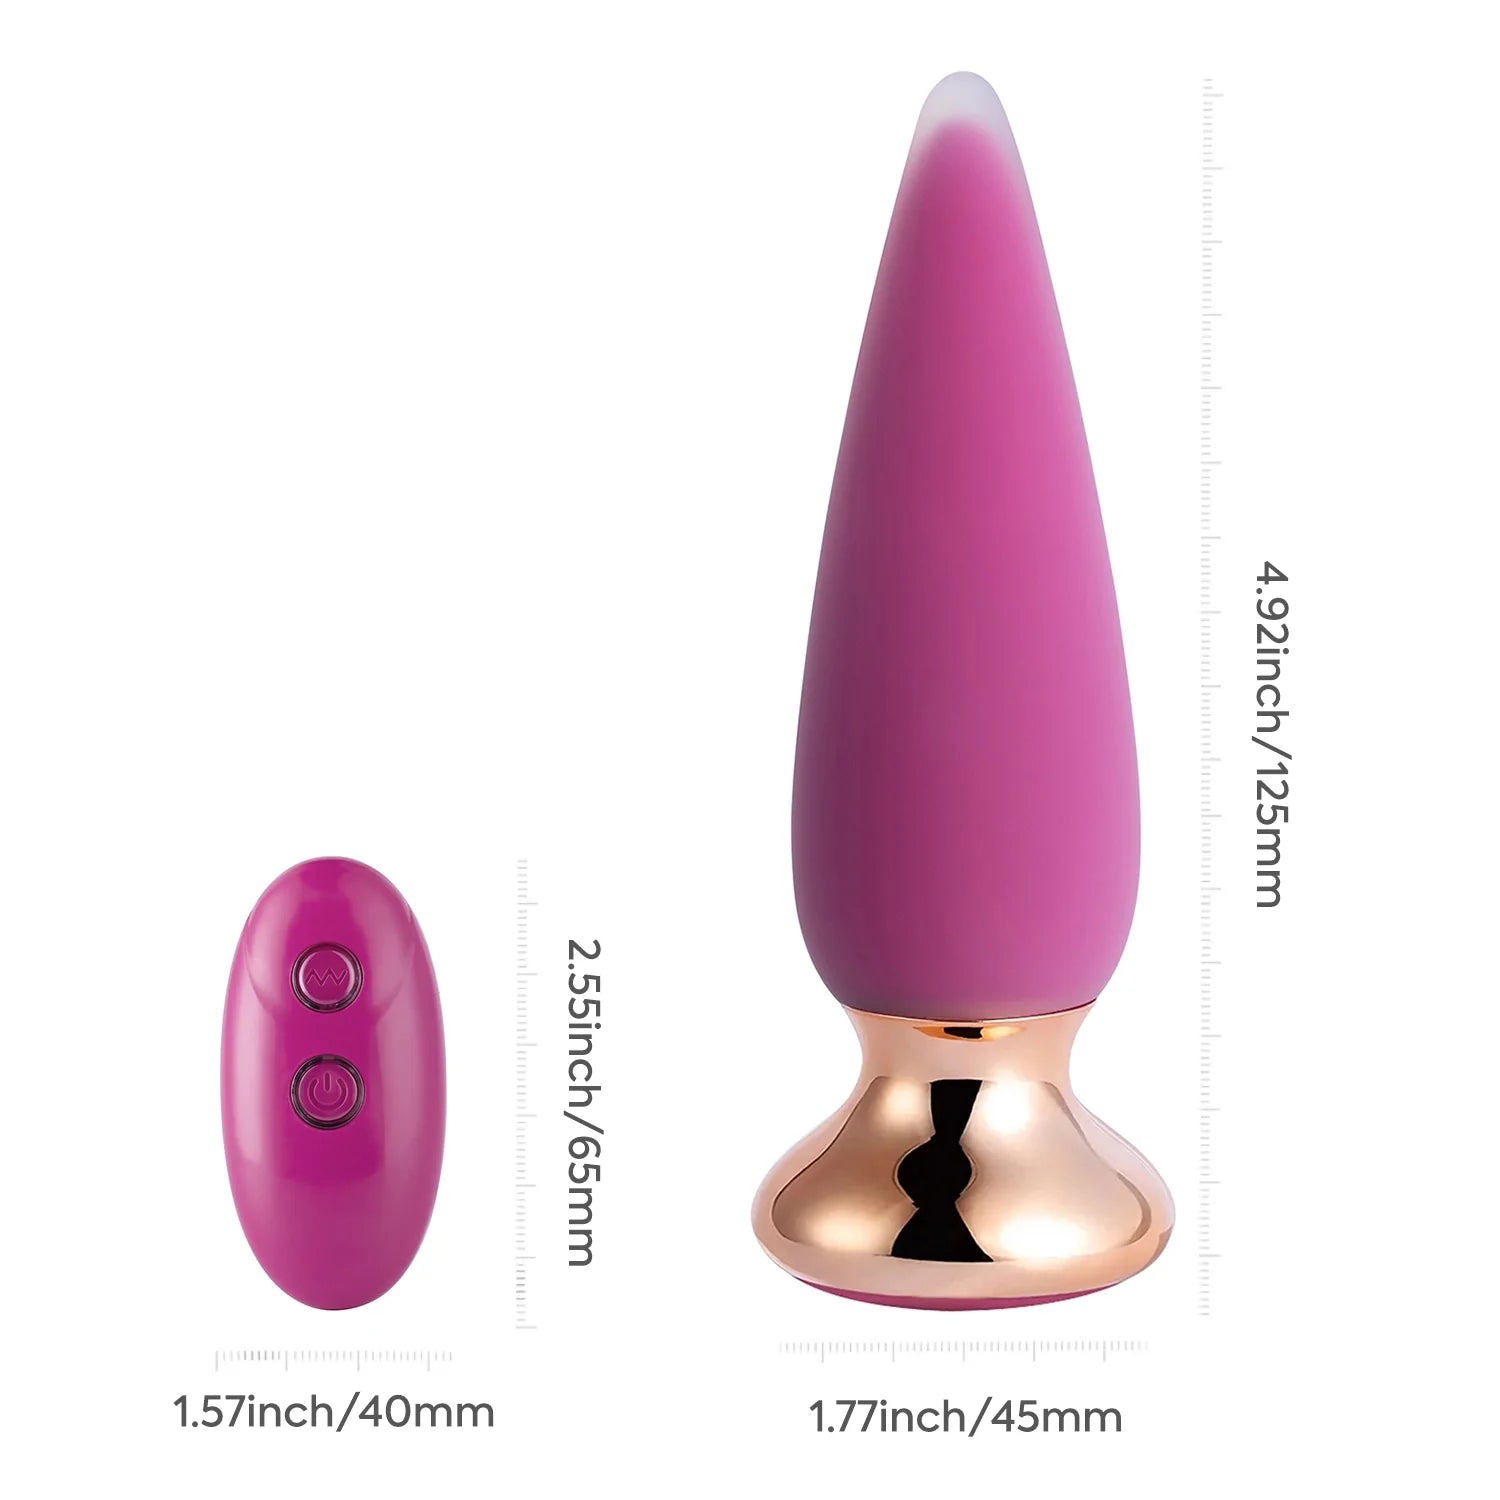 Vibrating Anal Plug with Remote Control - Enhance Your Intimate Adventures-BestGSpot